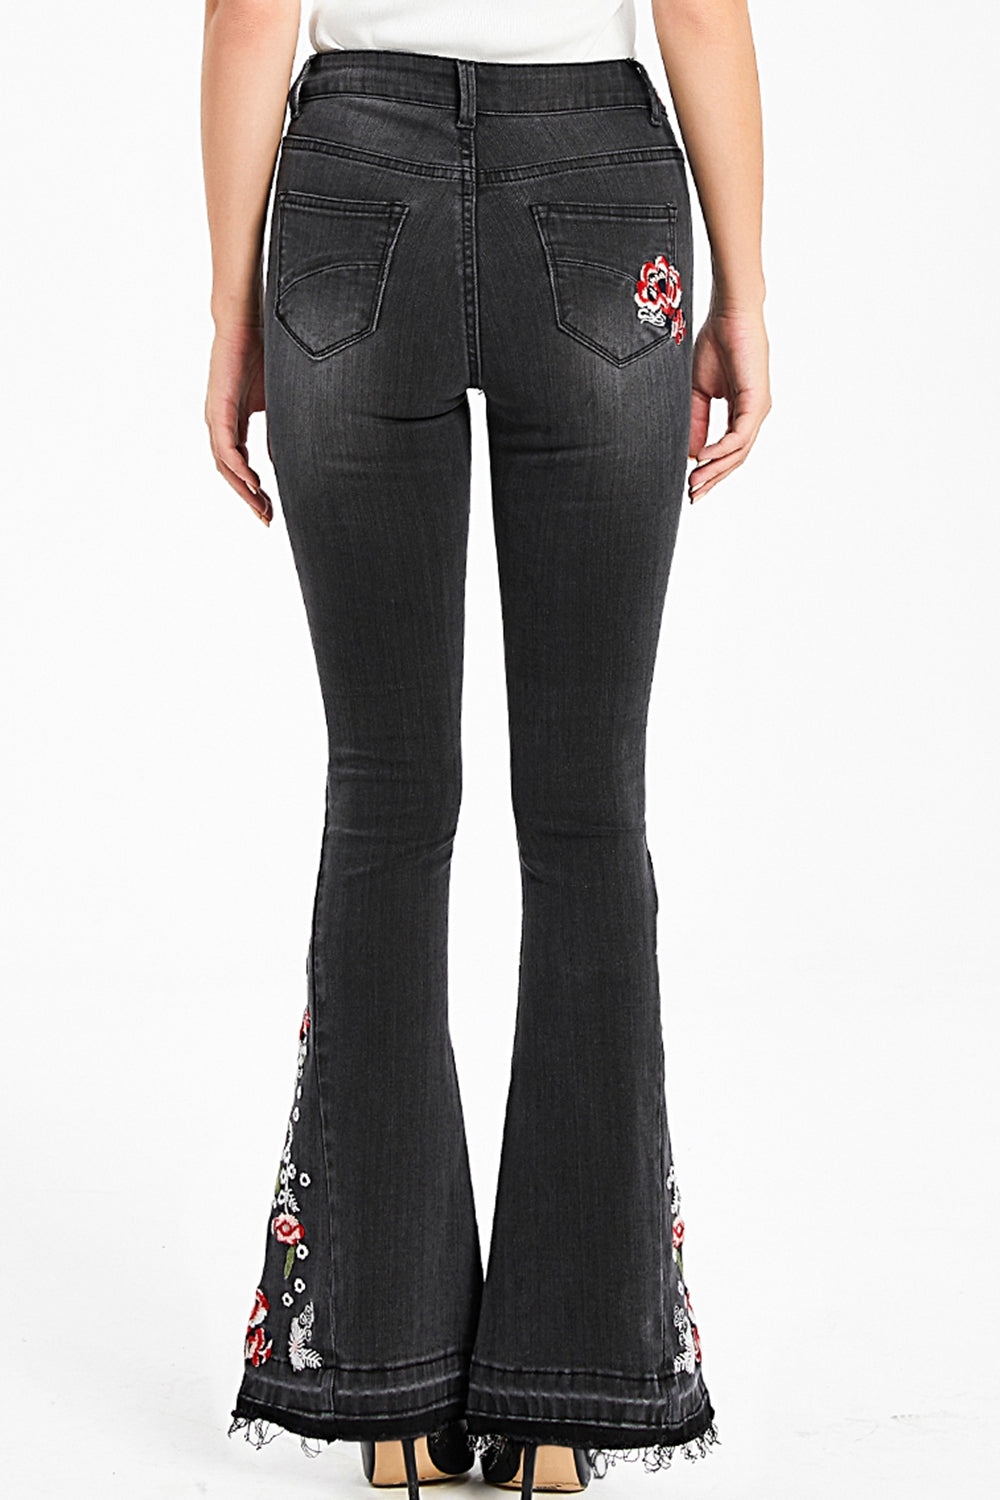 Full Size Raw Hem Flower Embroidery Jeans